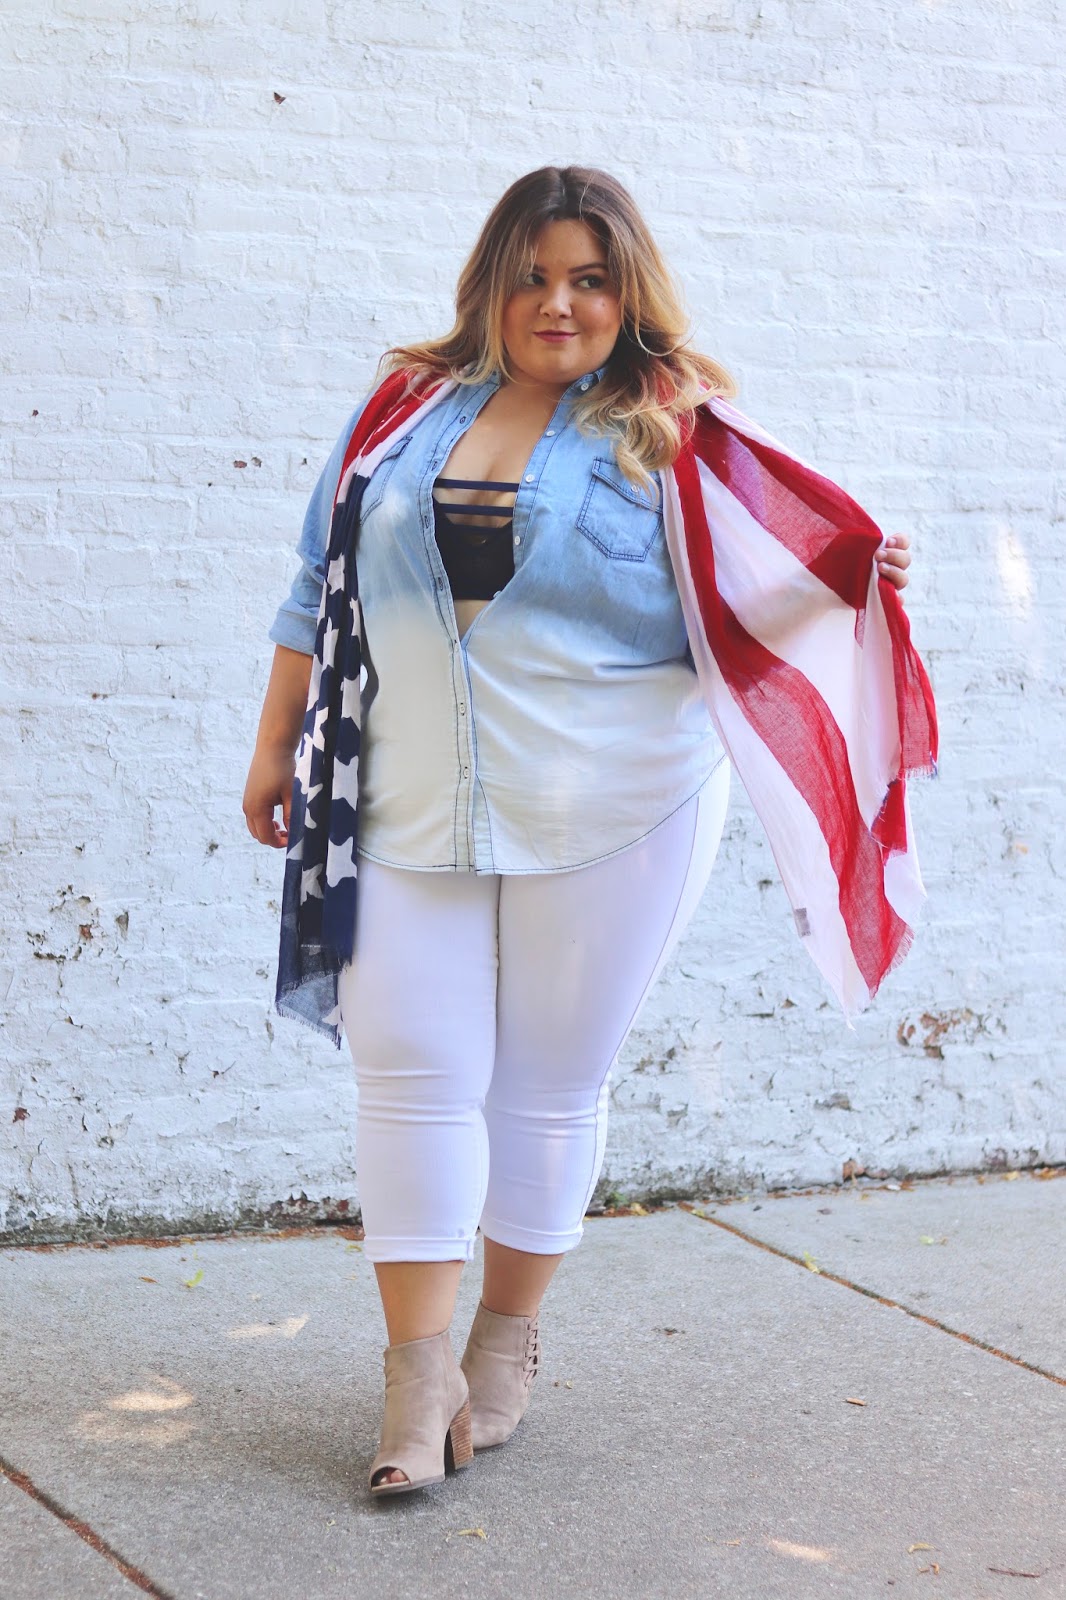 natalie craig, Natalie in the city, fourth of July outfits, 4th of July fashion, torrid, blogger review, summer fashion trends, American flag, fatshion, plus size fashion blogger, Chicago blogger, midwest blogger, curves and confidence, affordable plus size clothing, chambray, plus size white denim